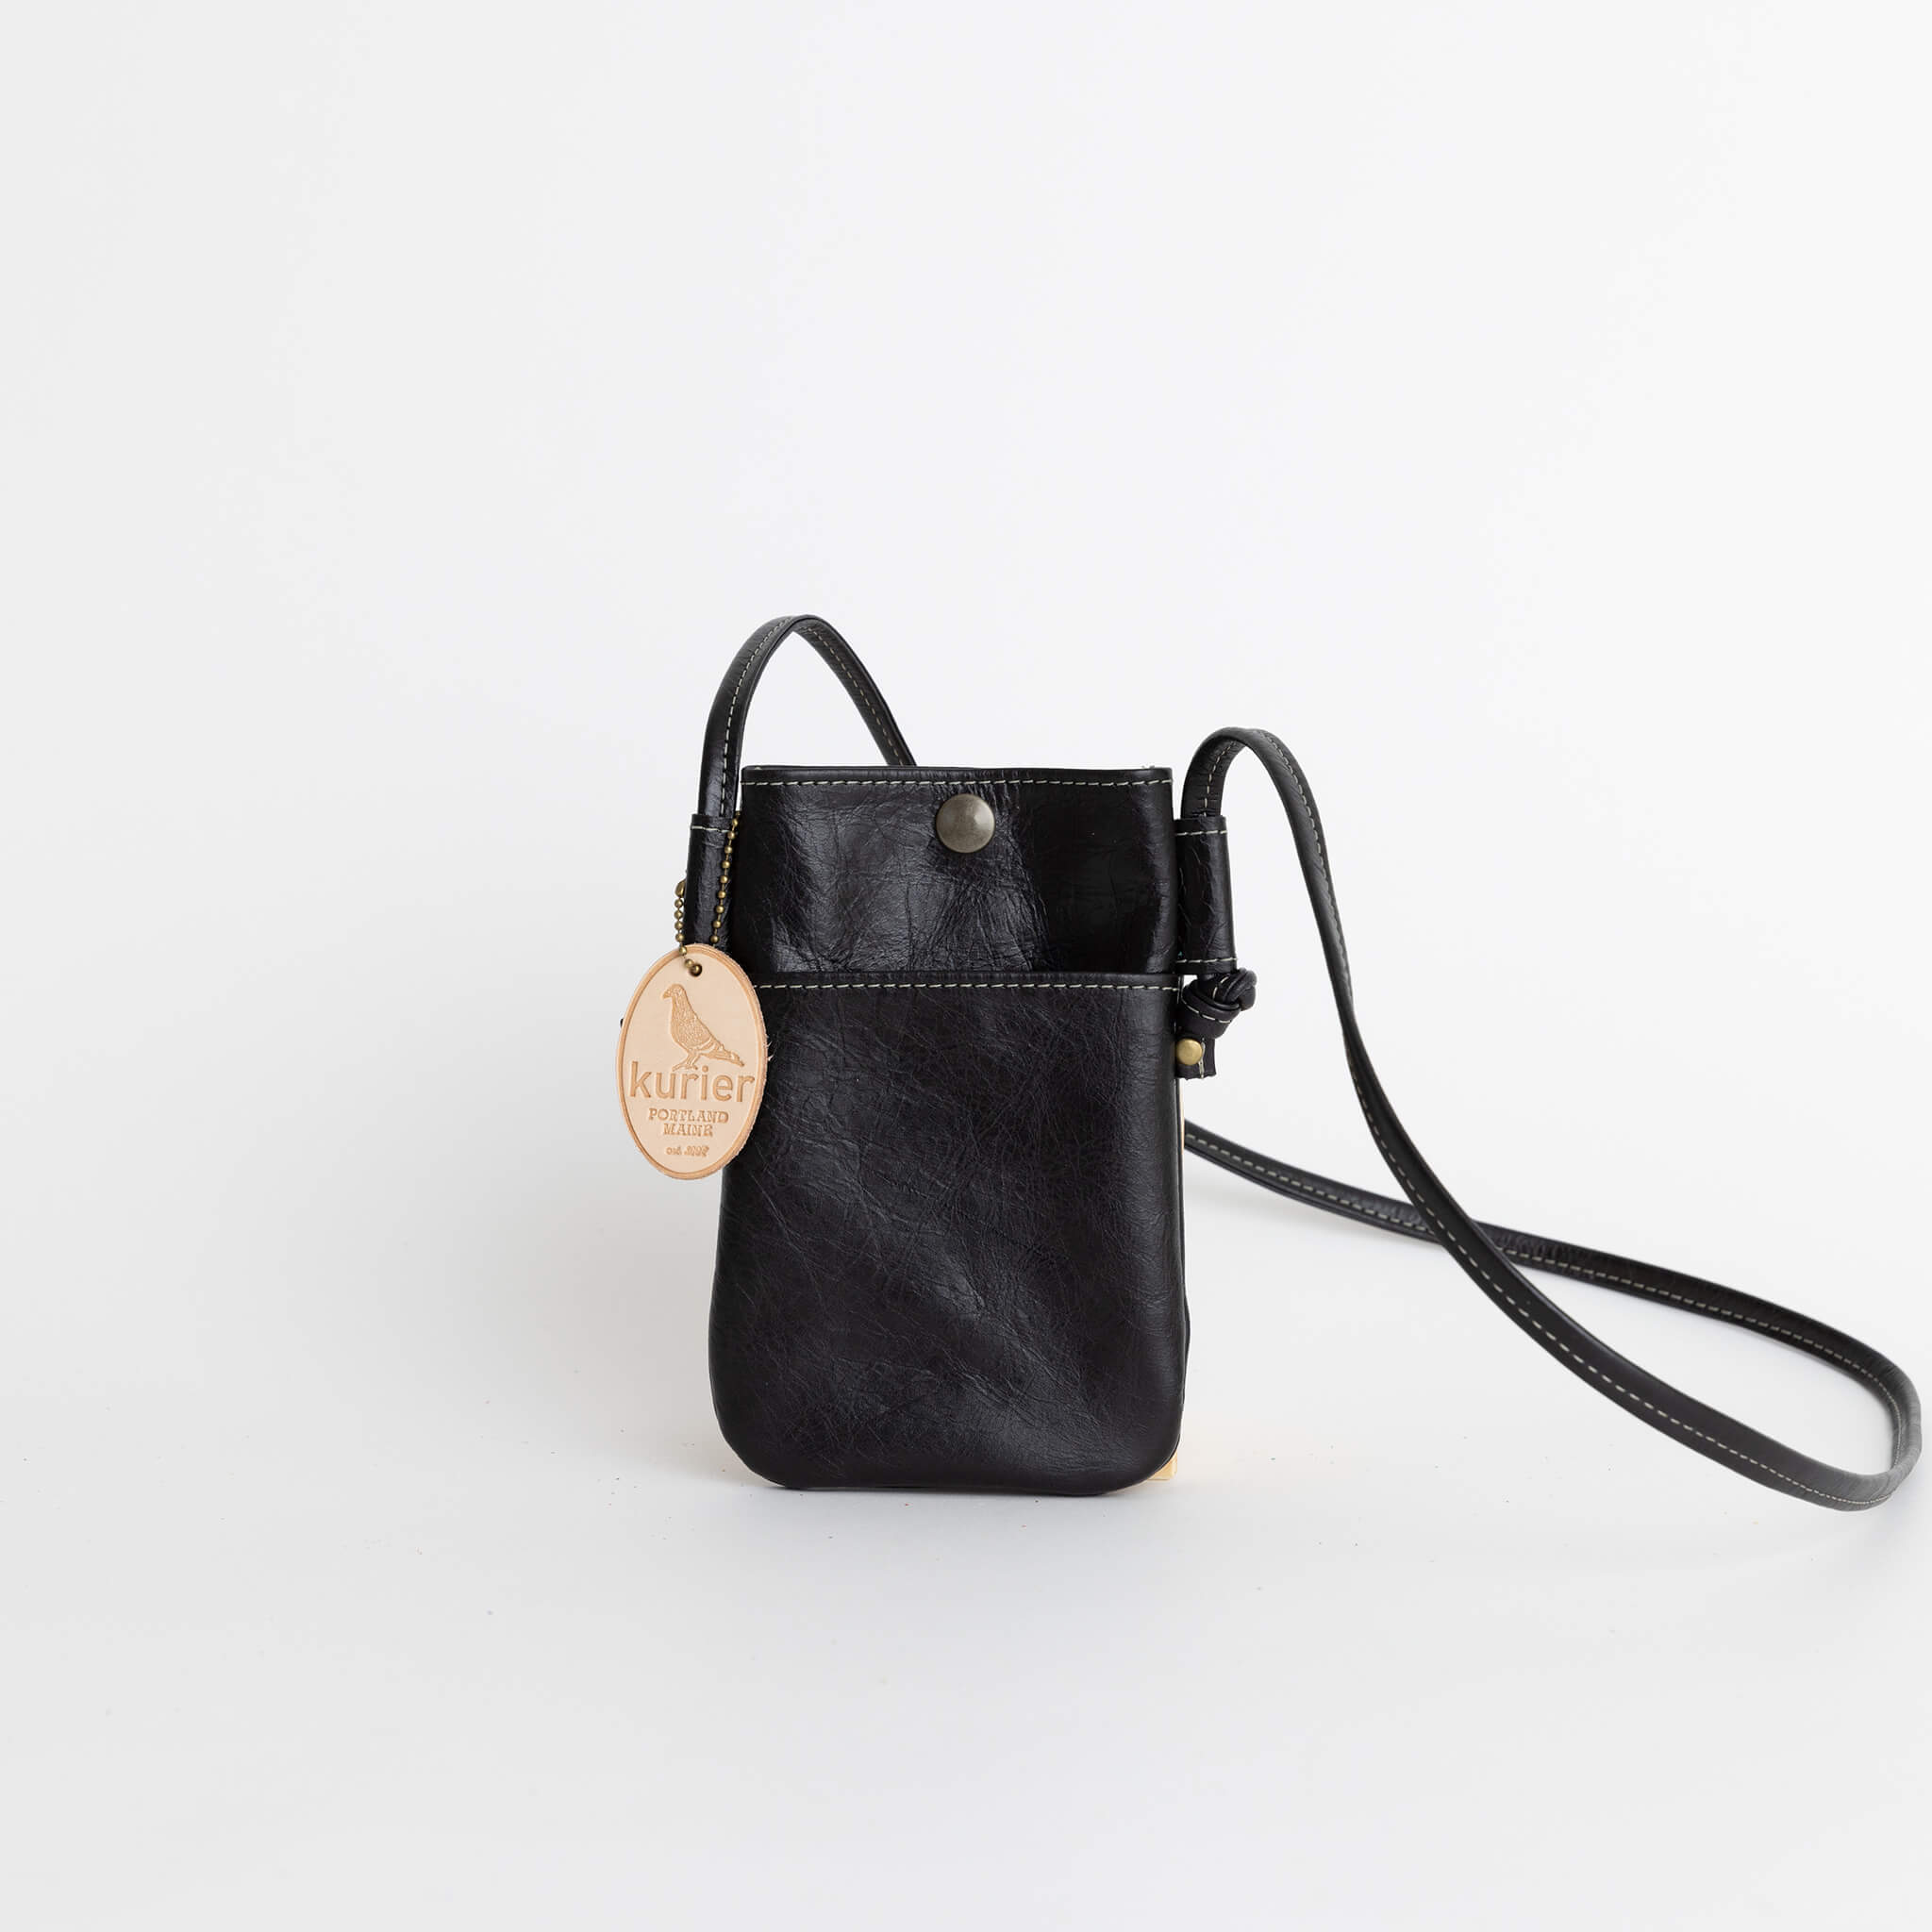 thompson crossbody pouch - handmade leather - black front view